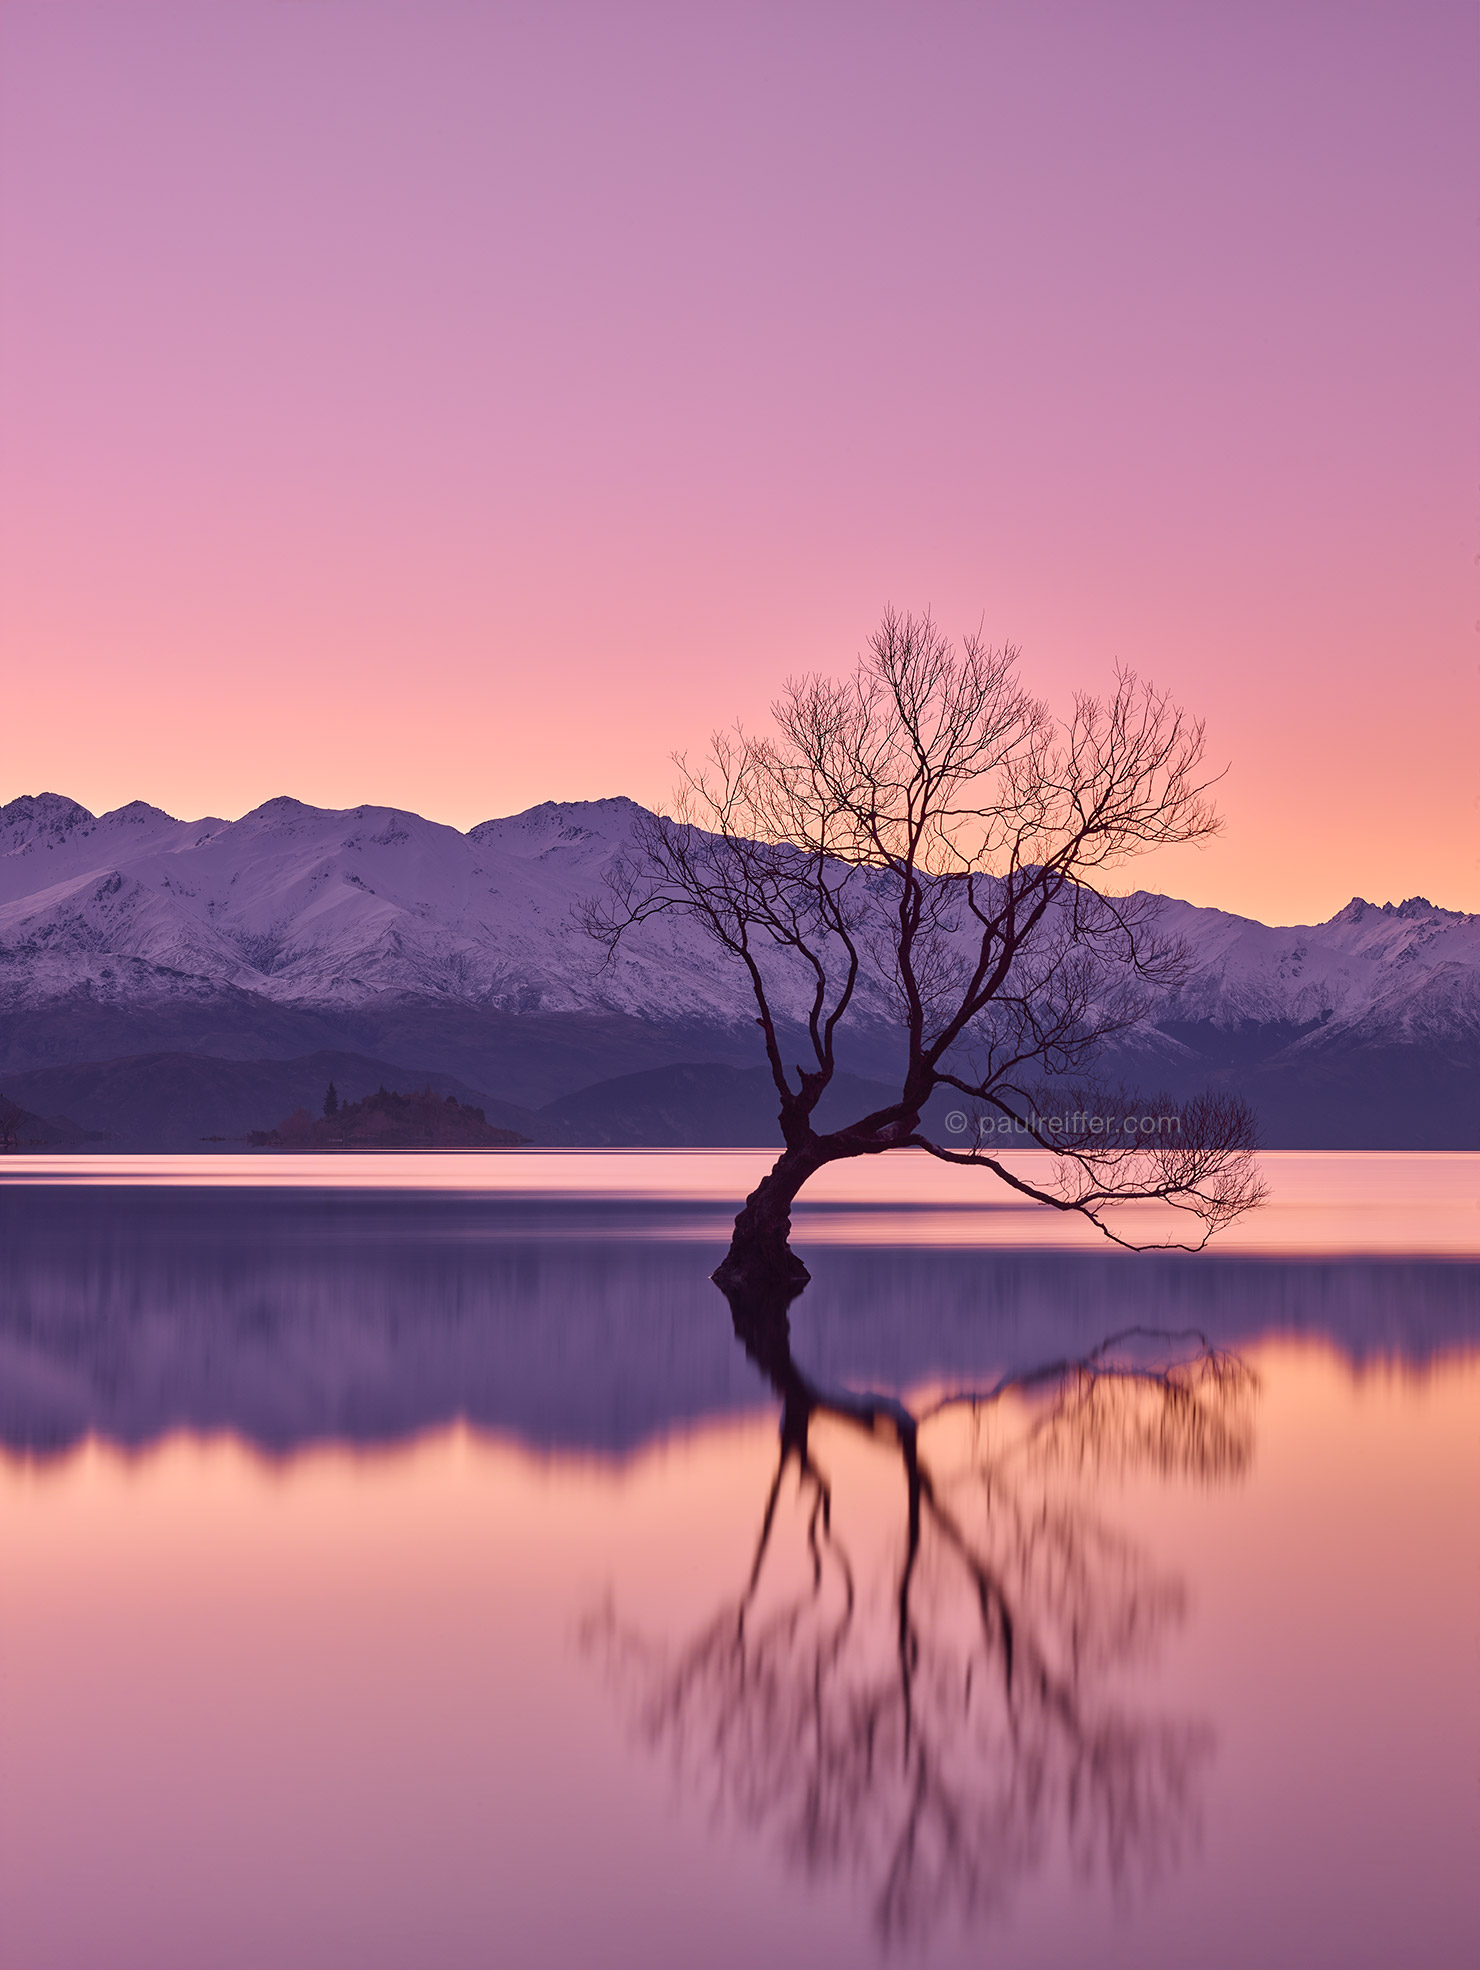 still paul reiffer photographer that wanaka tree national geographic the worlds greatest landscapes new zealand sunset wall art limited edition photography fine decoration interior